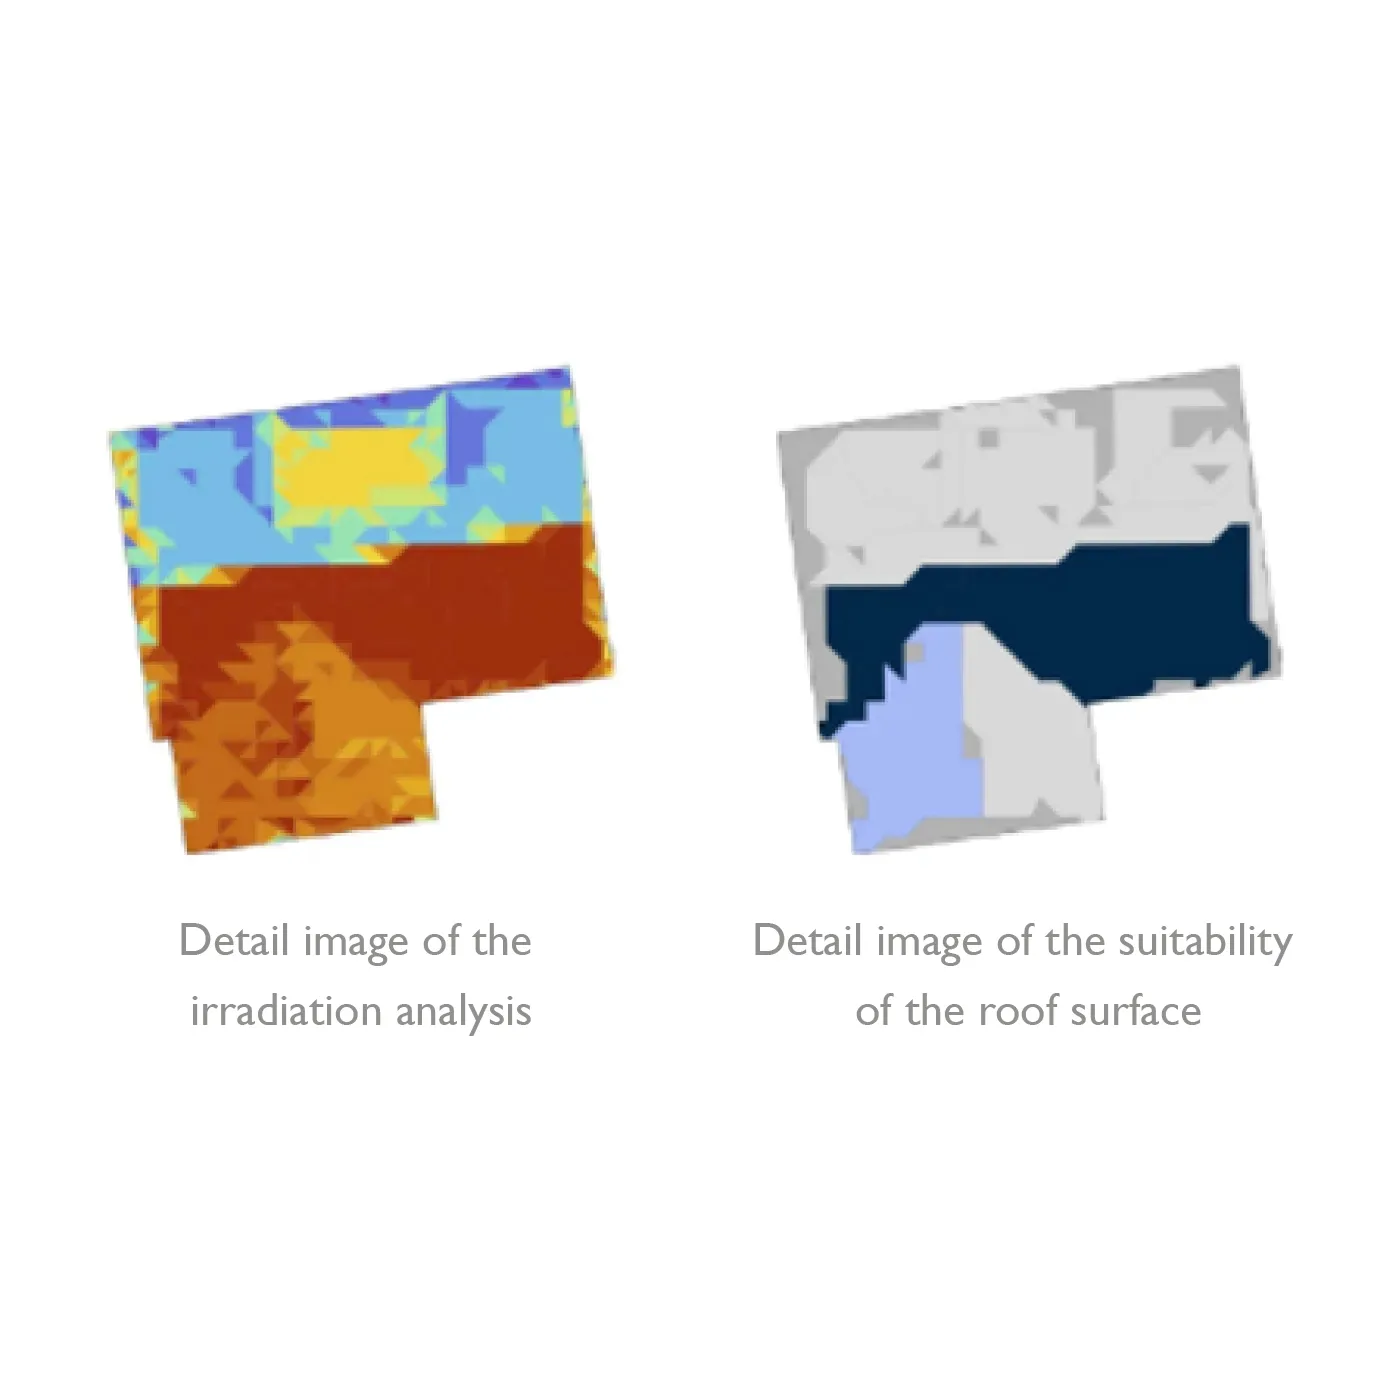 Detail images of irradiation analysis and suitability of the roof surface